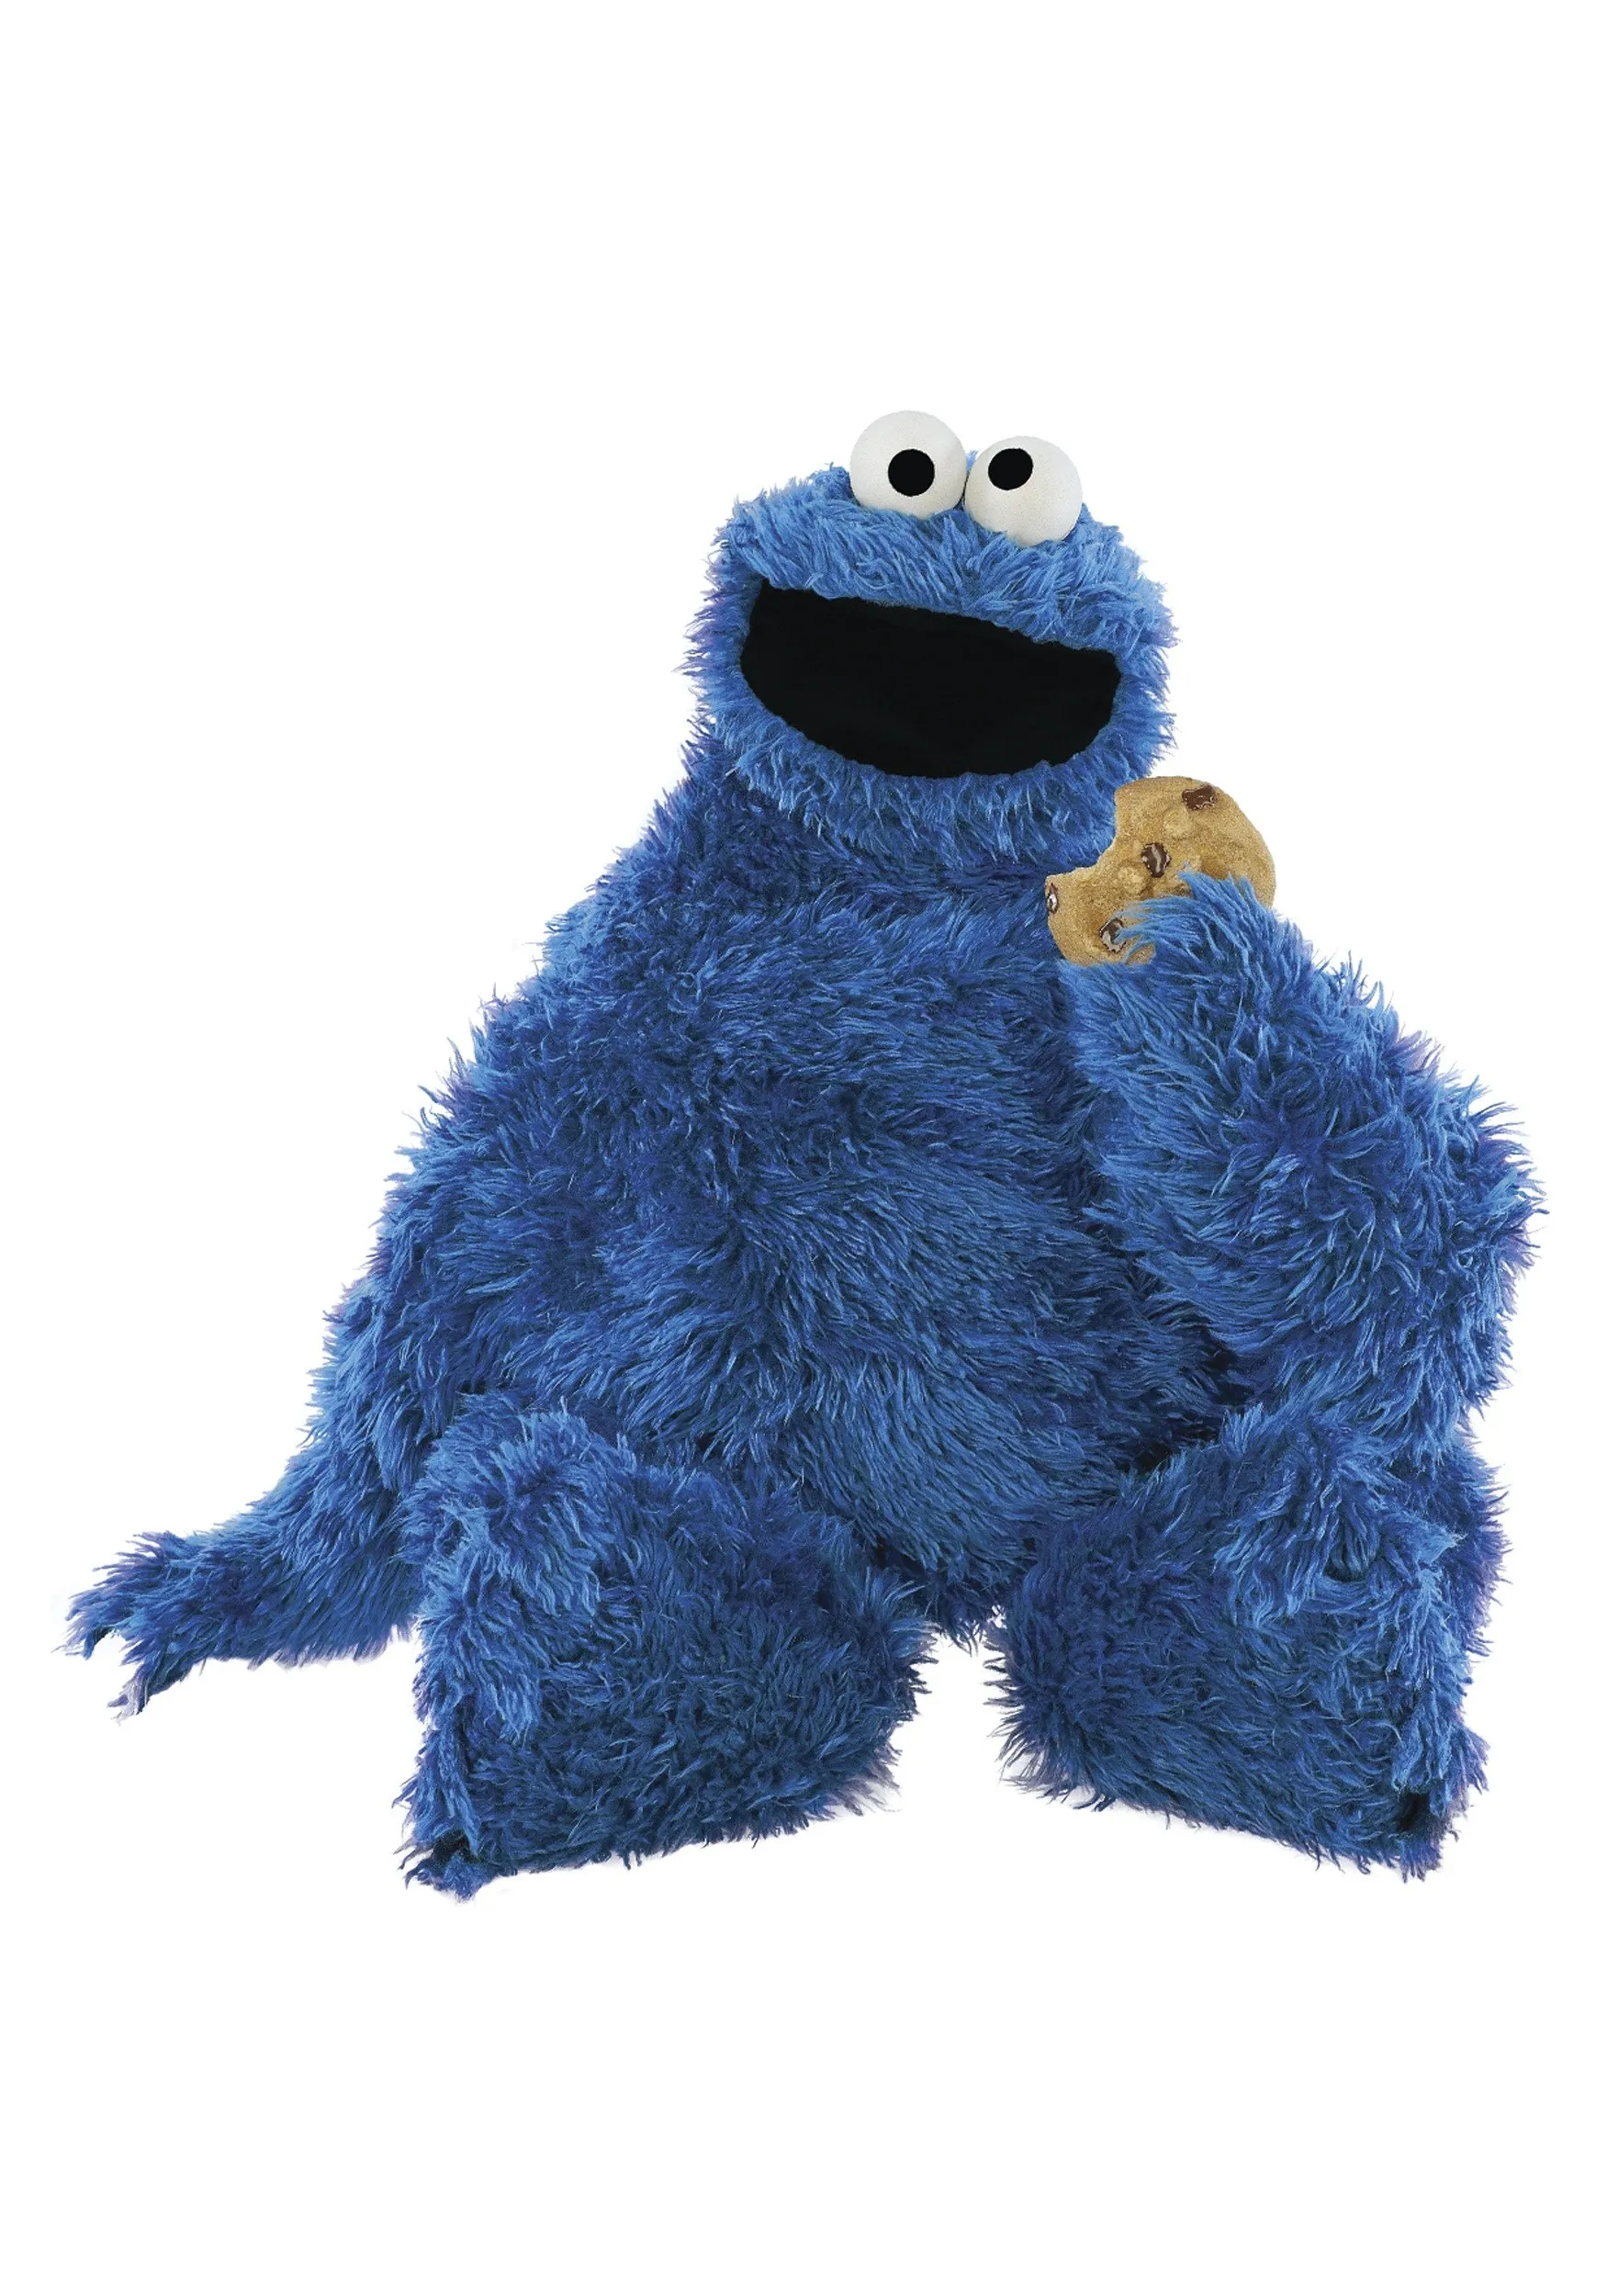 HD wallpaper, 1750X2500 Hd Phone, Mobile Hd Cookie Monster Sesame Street Background Photo, Charming Character, Cute Cookie Monster, Adorable Wallpaper, Delightful Design